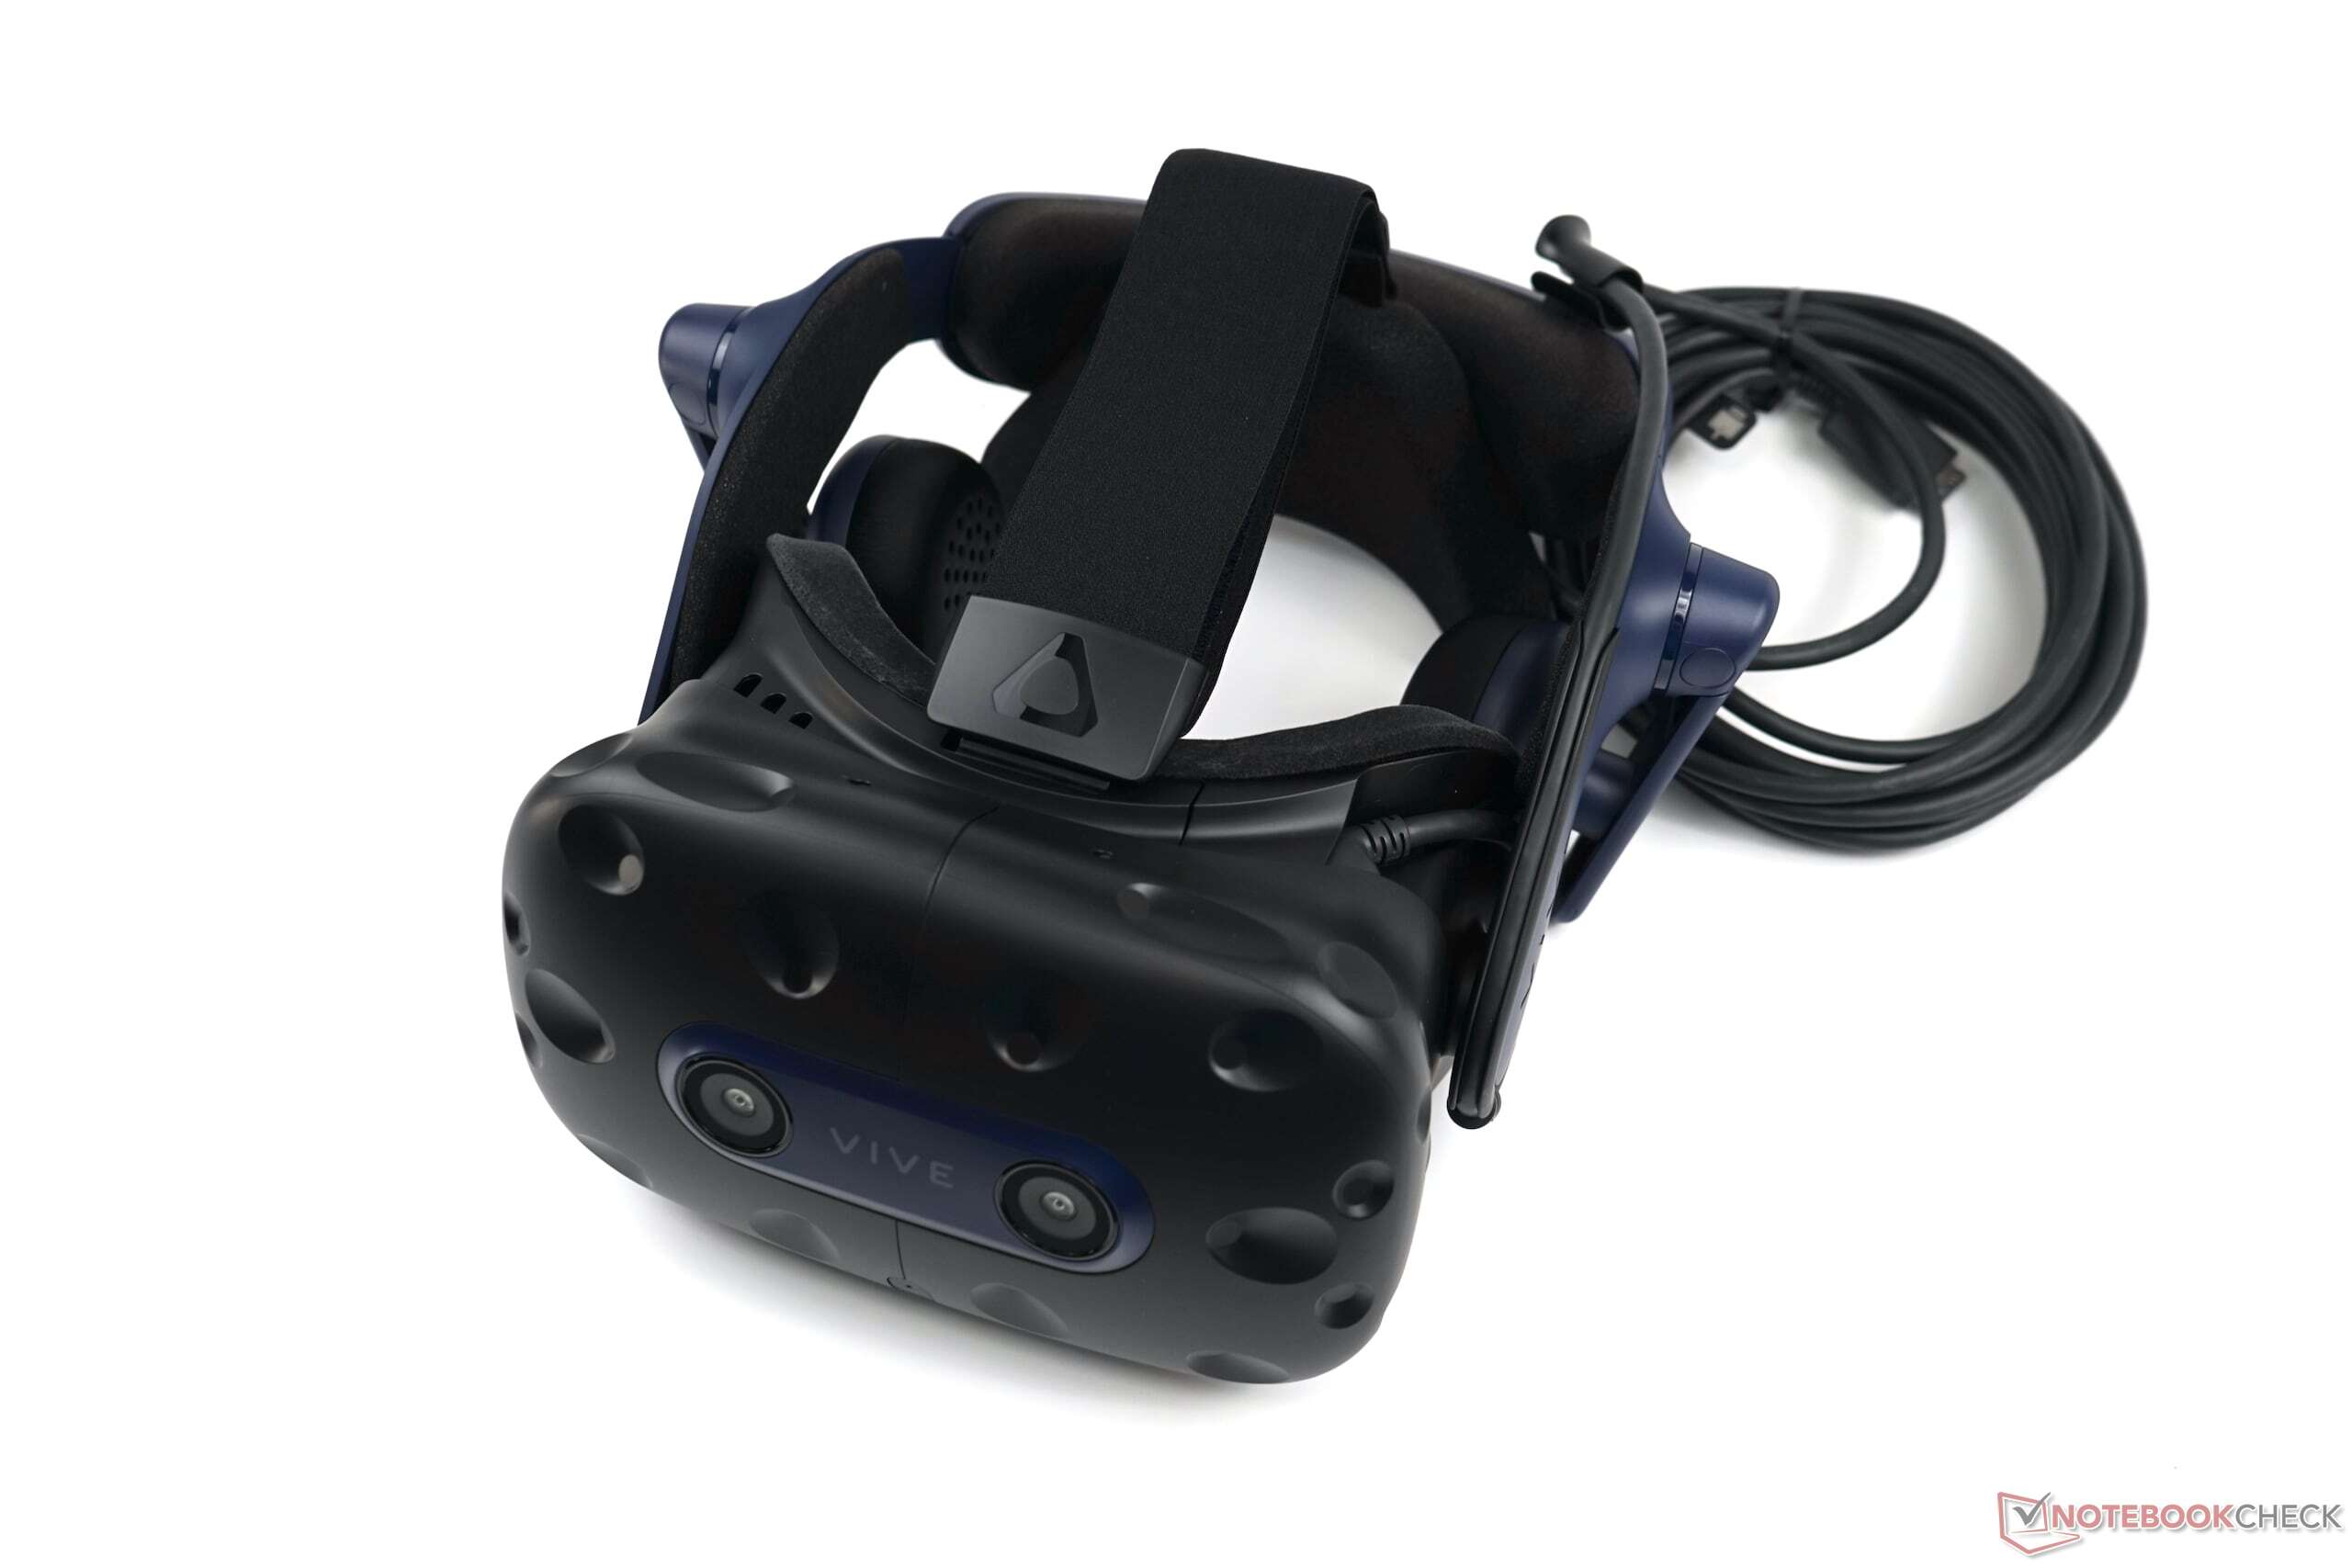 HTC Vive 2 - for Enthusiasts just Business Customers? - NotebookCheck.net Reviews